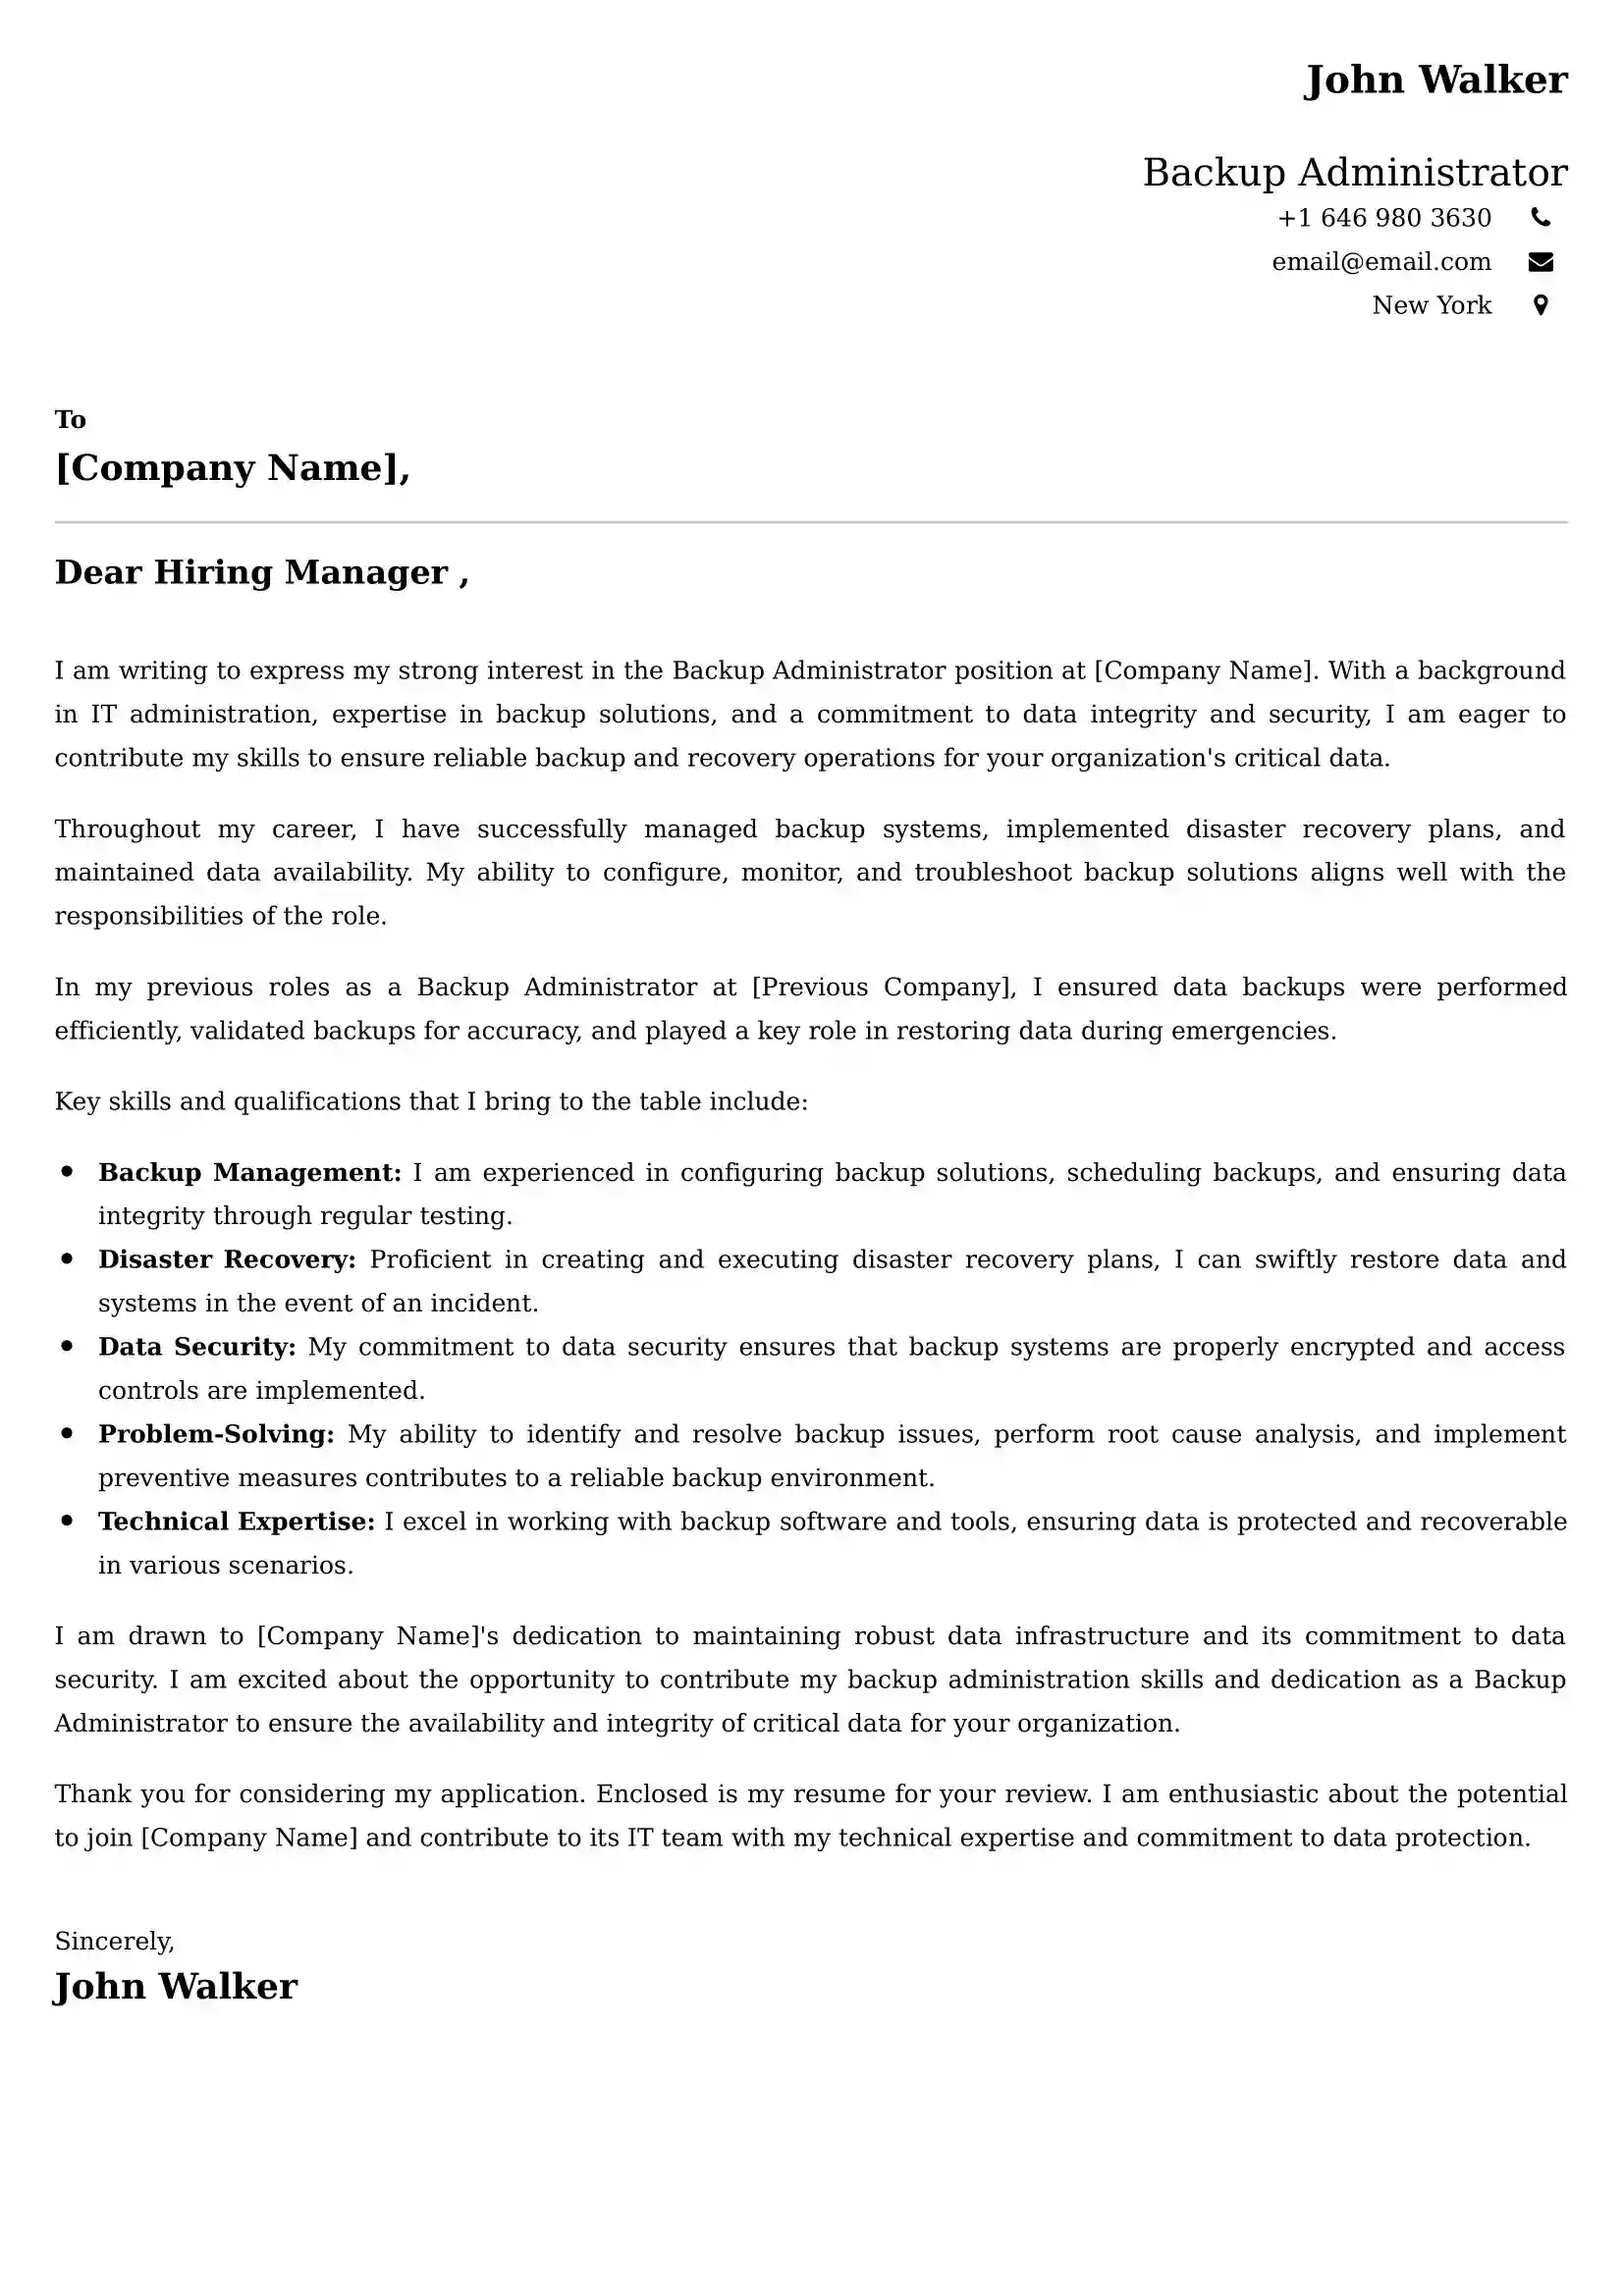 Backup Administrator Cover Letter Examples - Latest UK Format